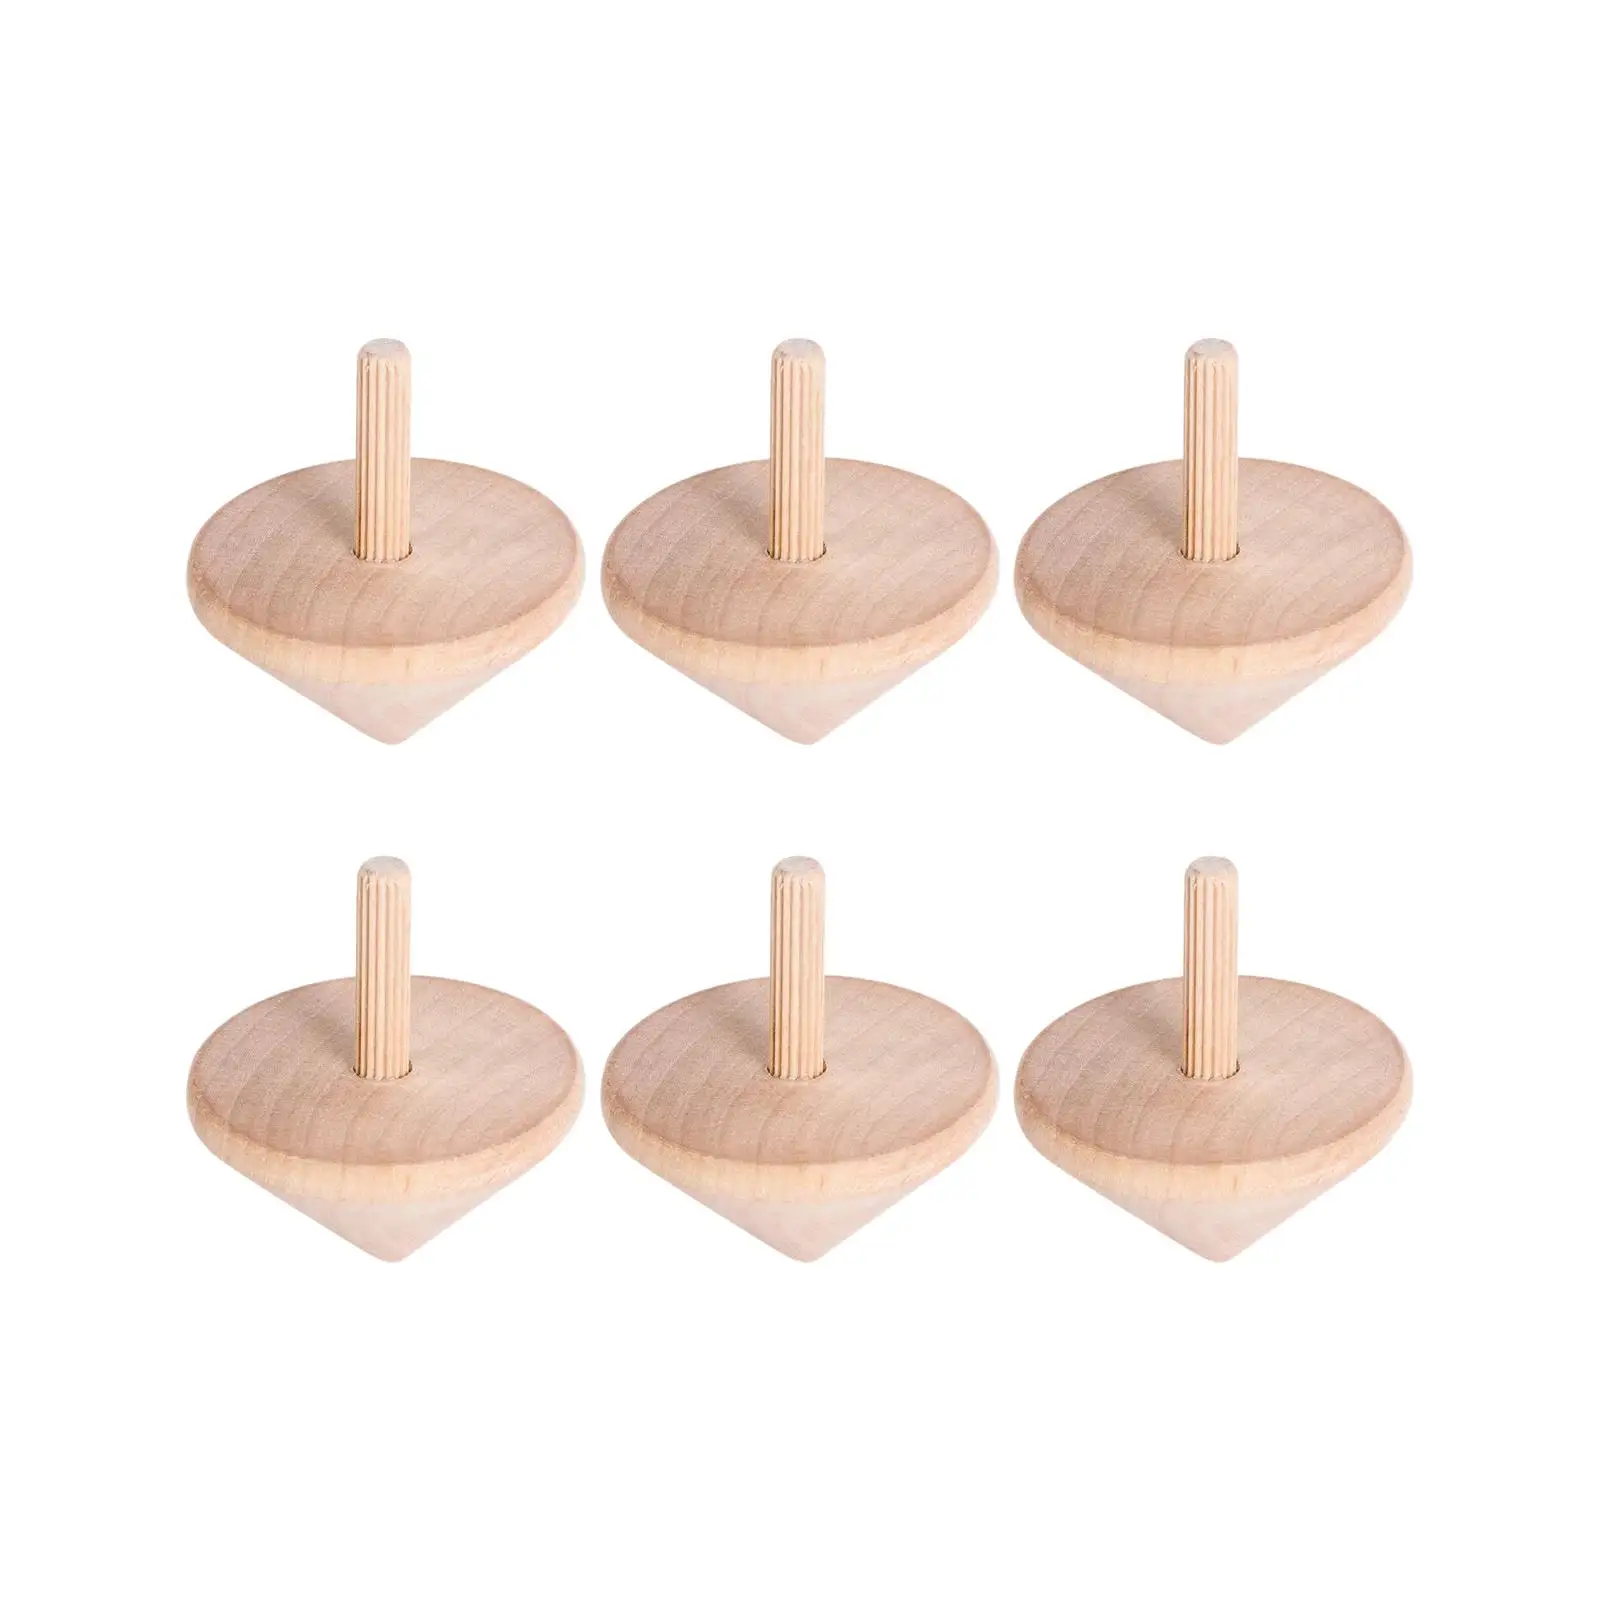 6Pcs Unpainted Wood Blank Tops Educational Toys Wooden Top Handmade DIY for Toddlers Children Games Party Supplies Gift